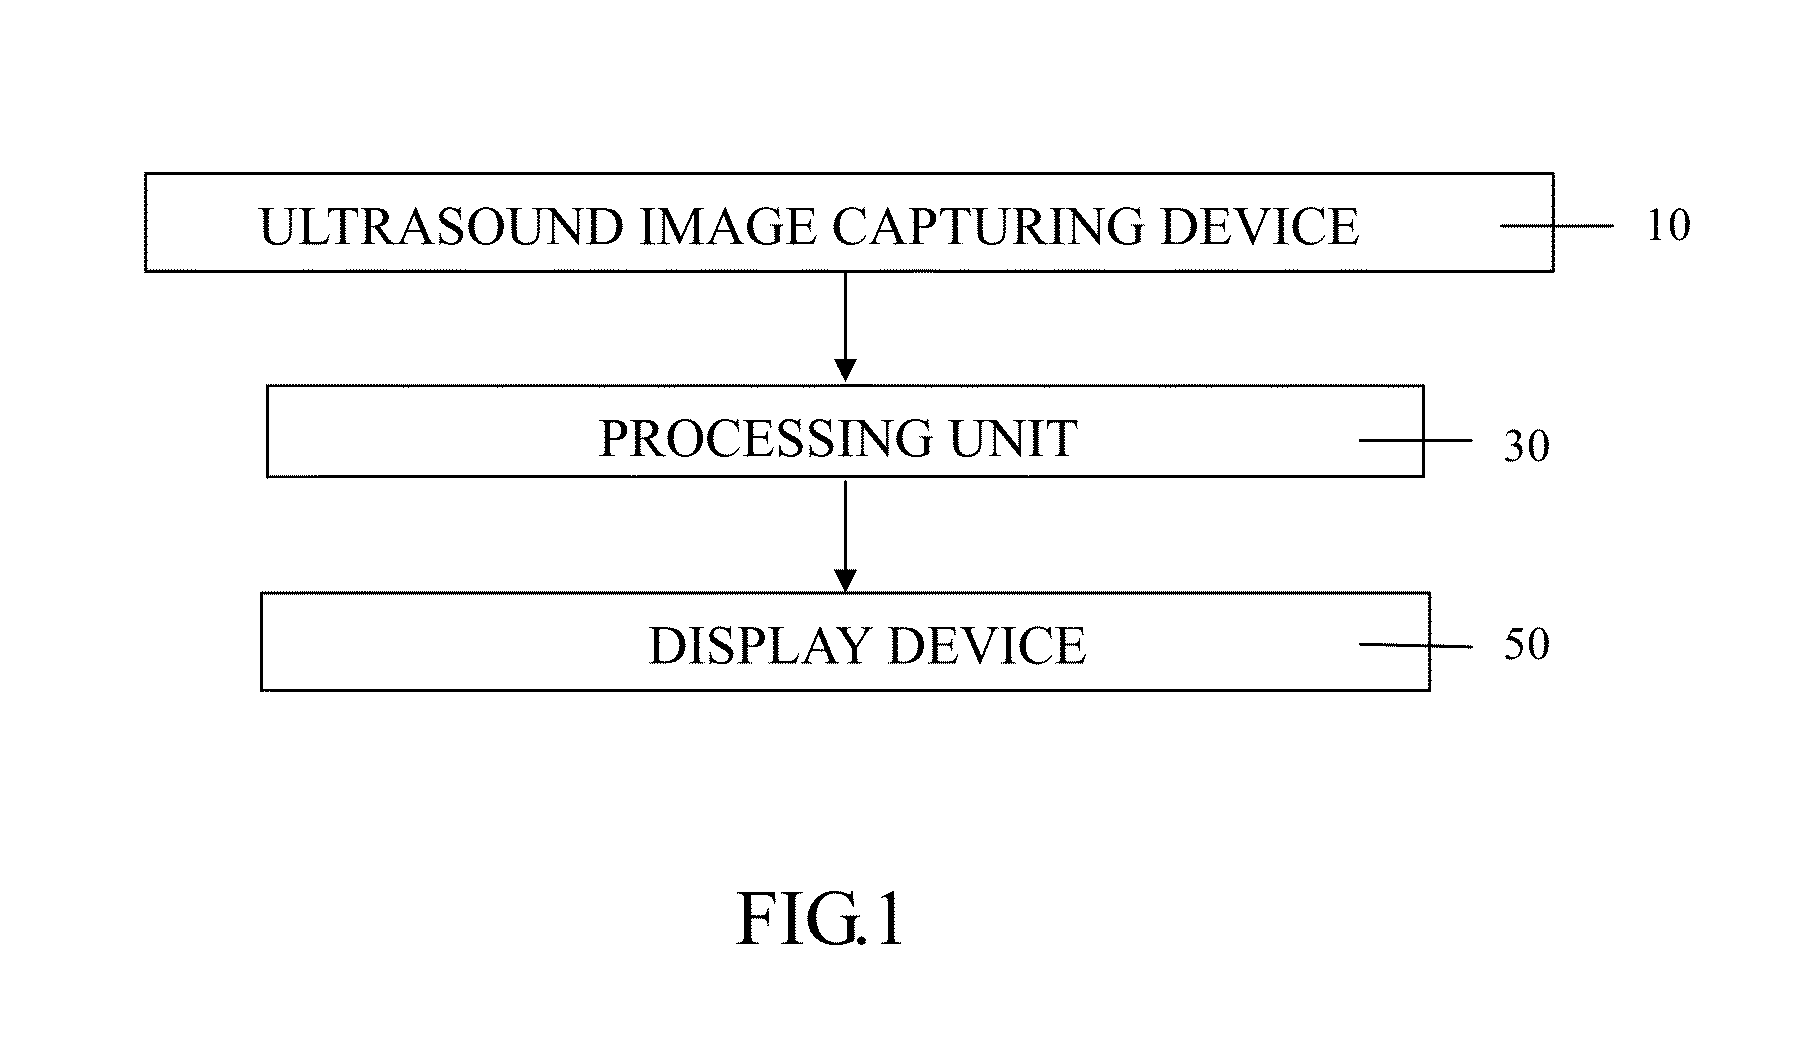 Acceleration and enhancement methods and system for ultrasound scatterer structure visualization